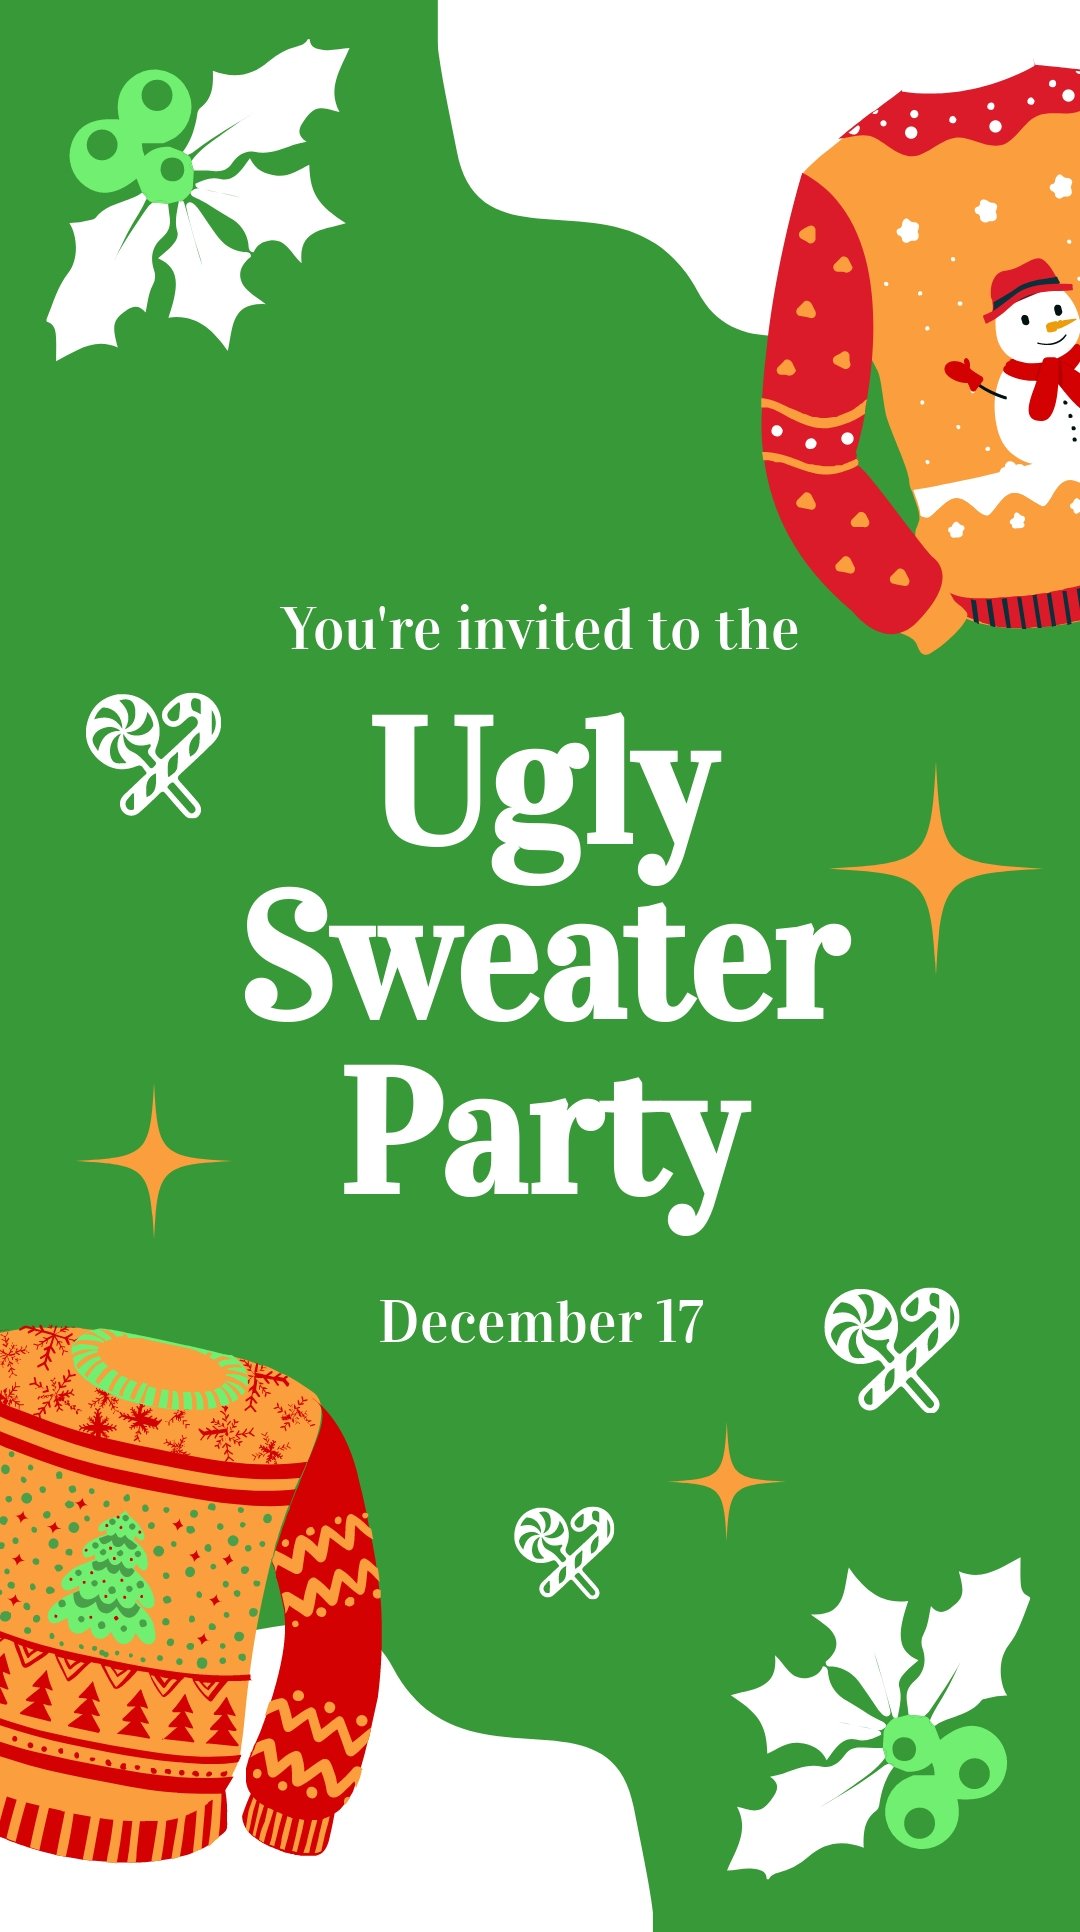 Ugly sweater party banner, invitation or poster for Christmas